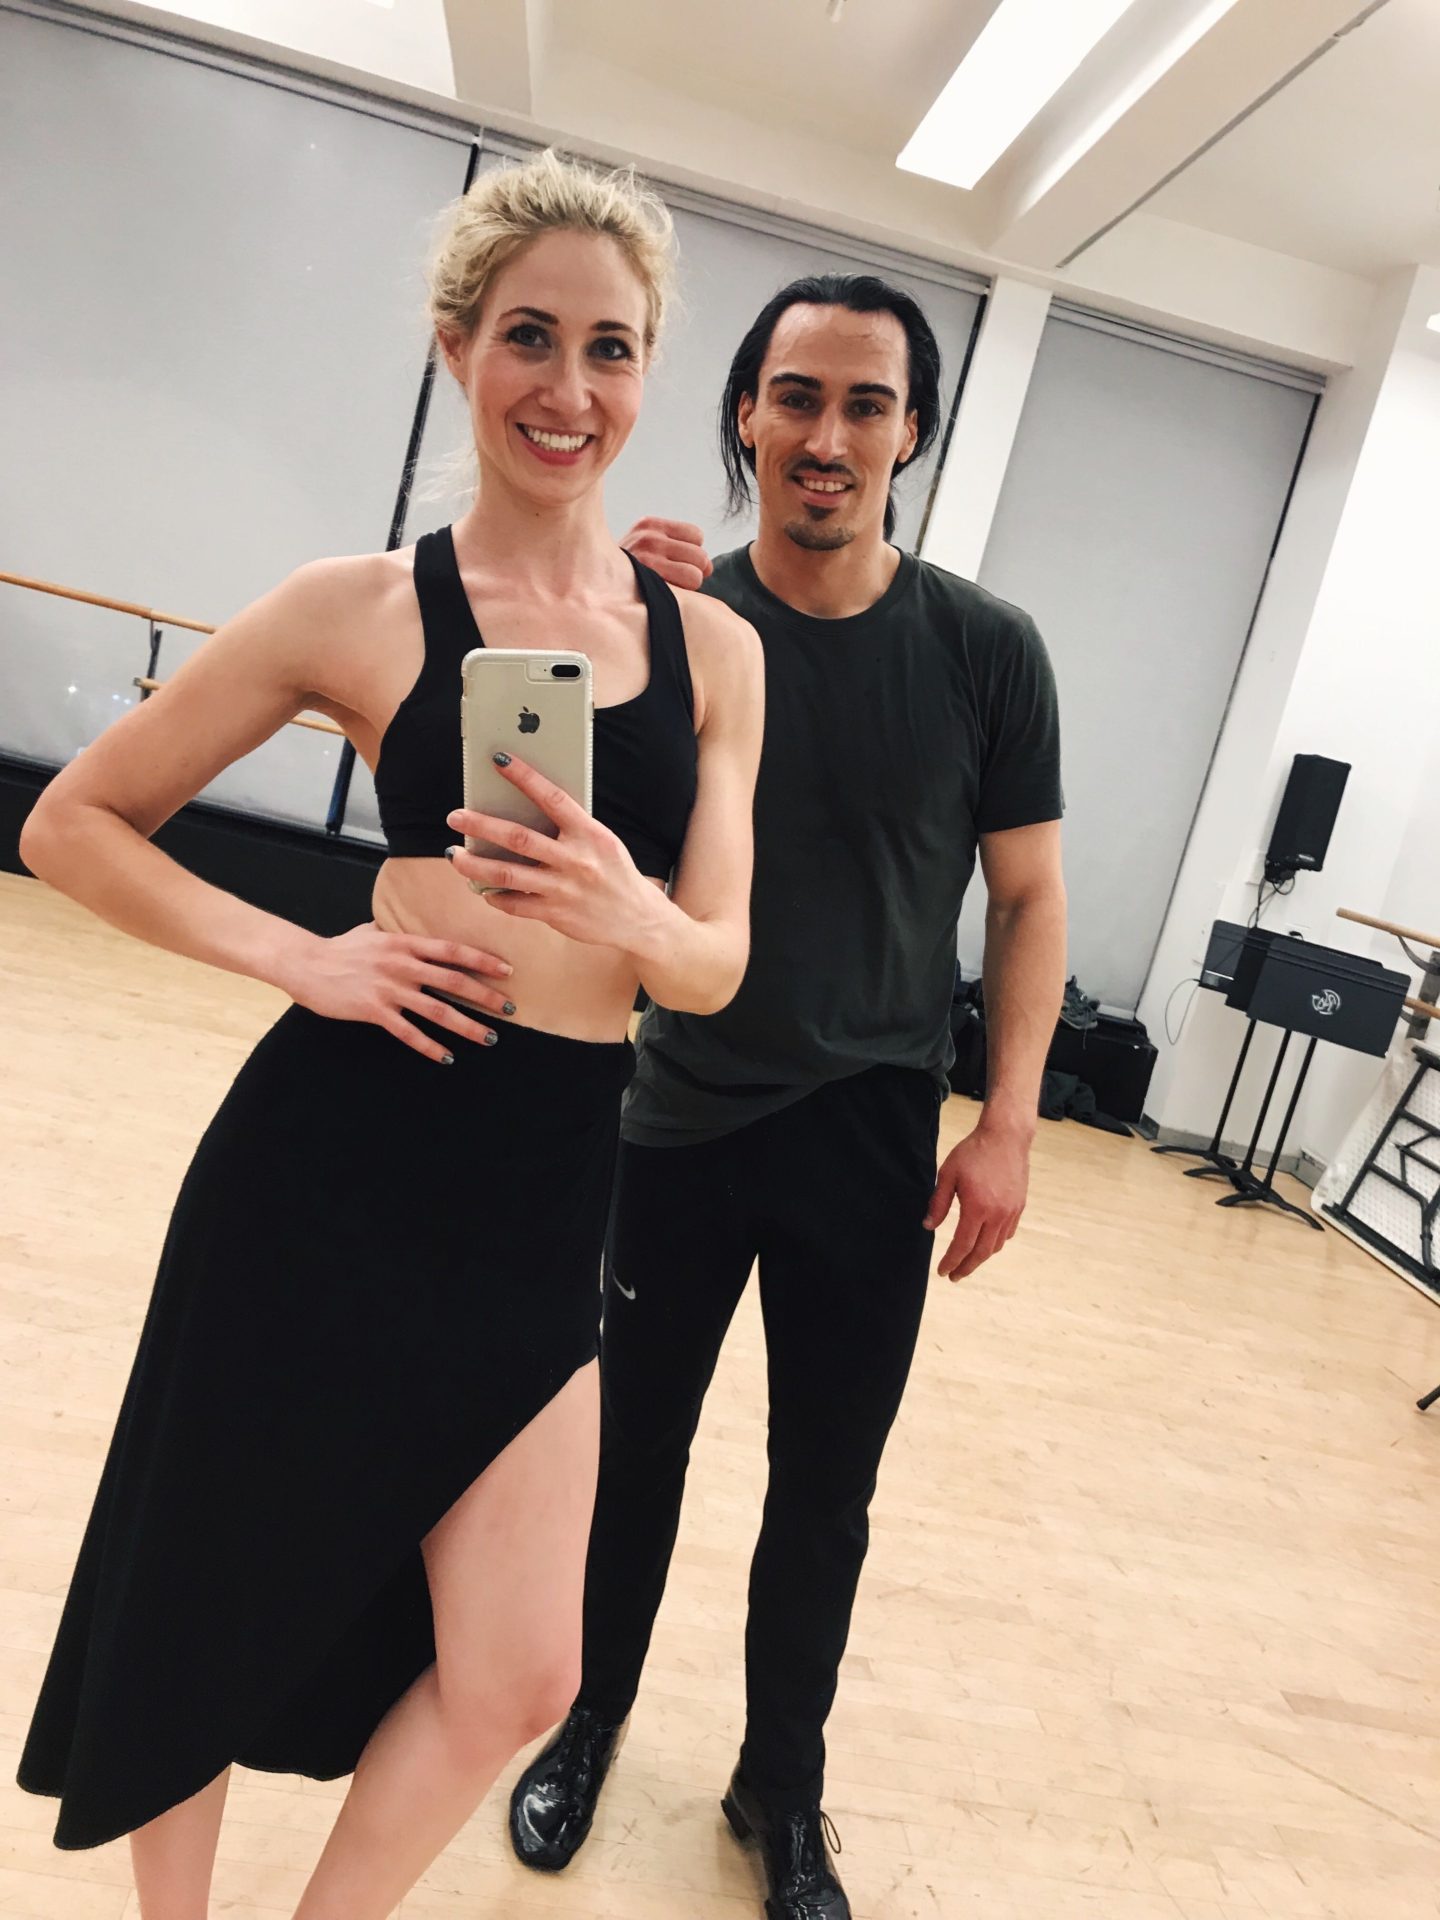 Post-auditions at Ripley Grier studios in New York dancers, Brielle Friedman and Hunter Houde